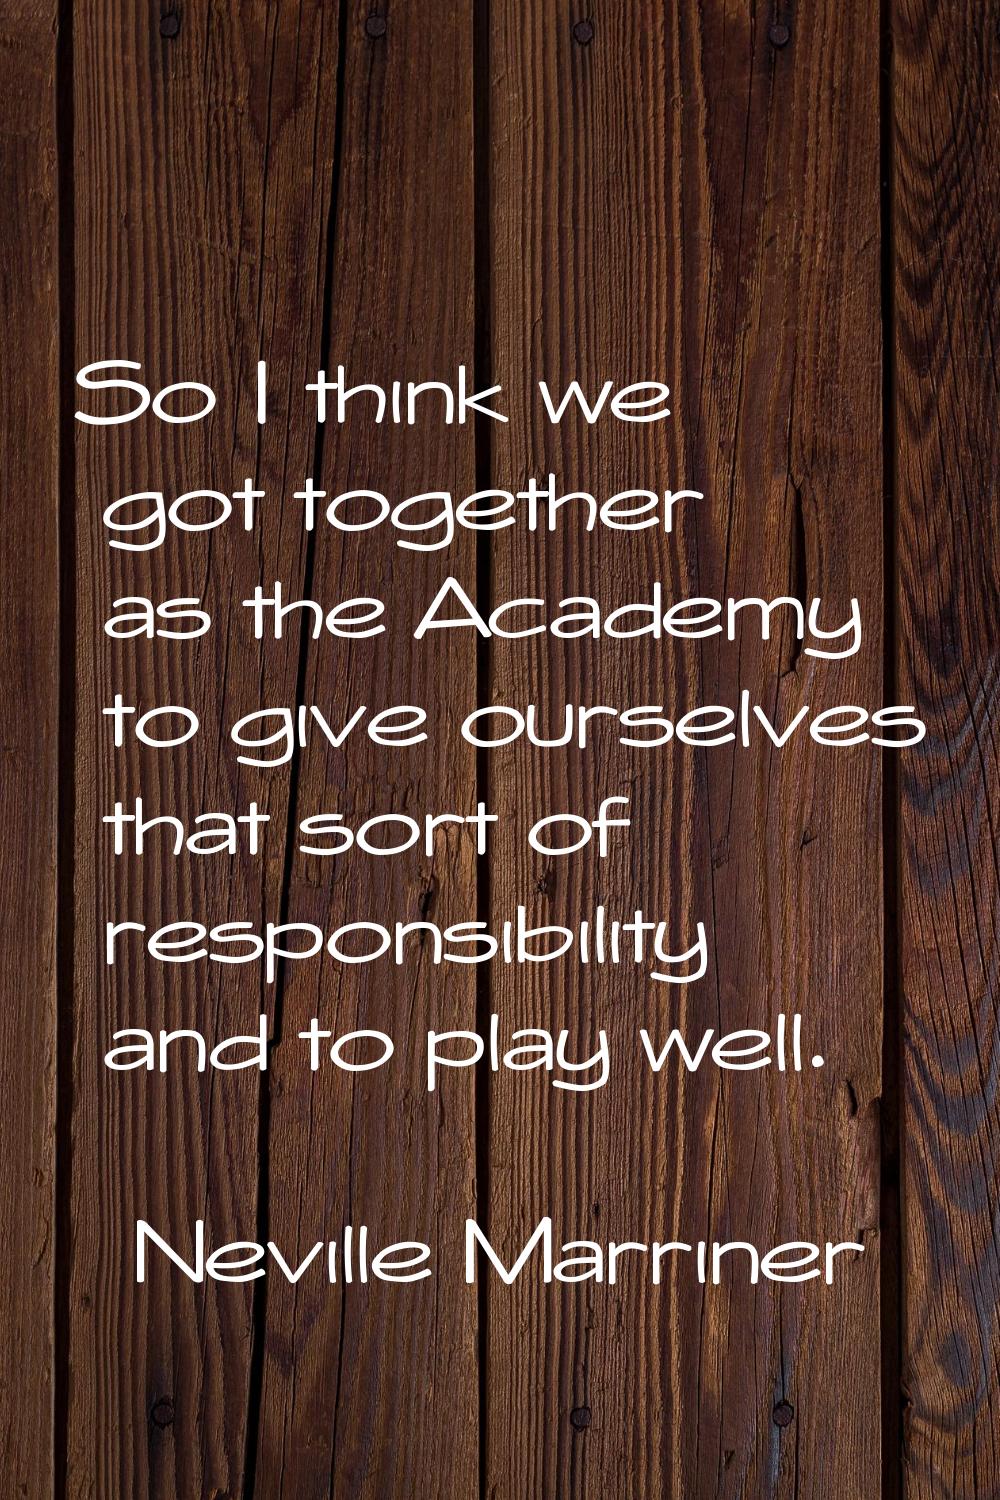 So I think we got together as the Academy to give ourselves that sort of responsibility and to play